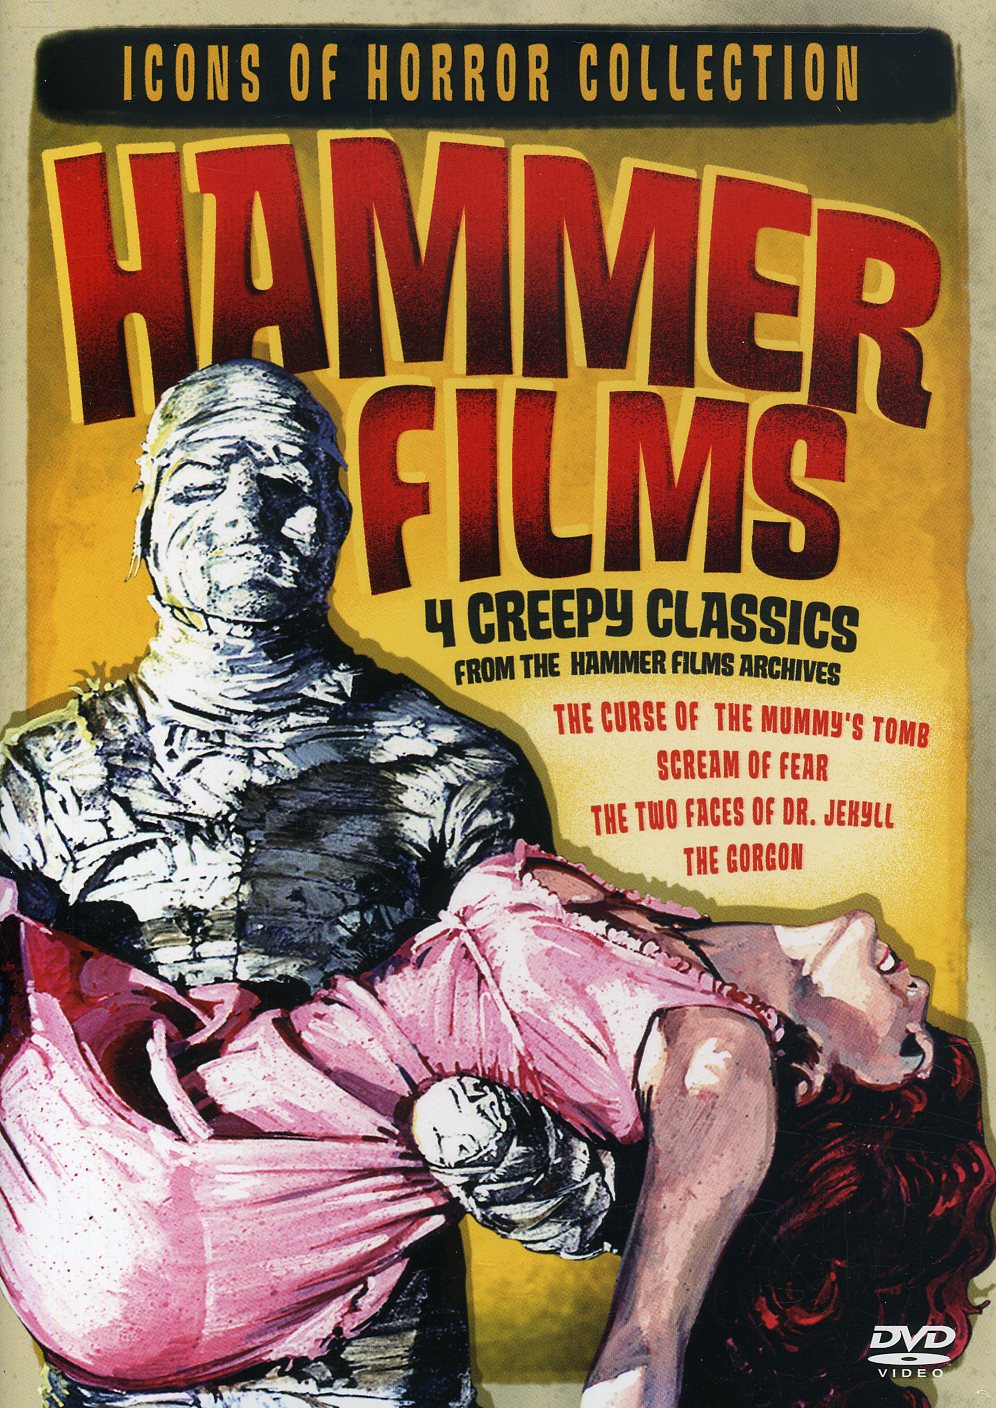 ICONS OF HORROR: HAMMER FILMS (2PC)